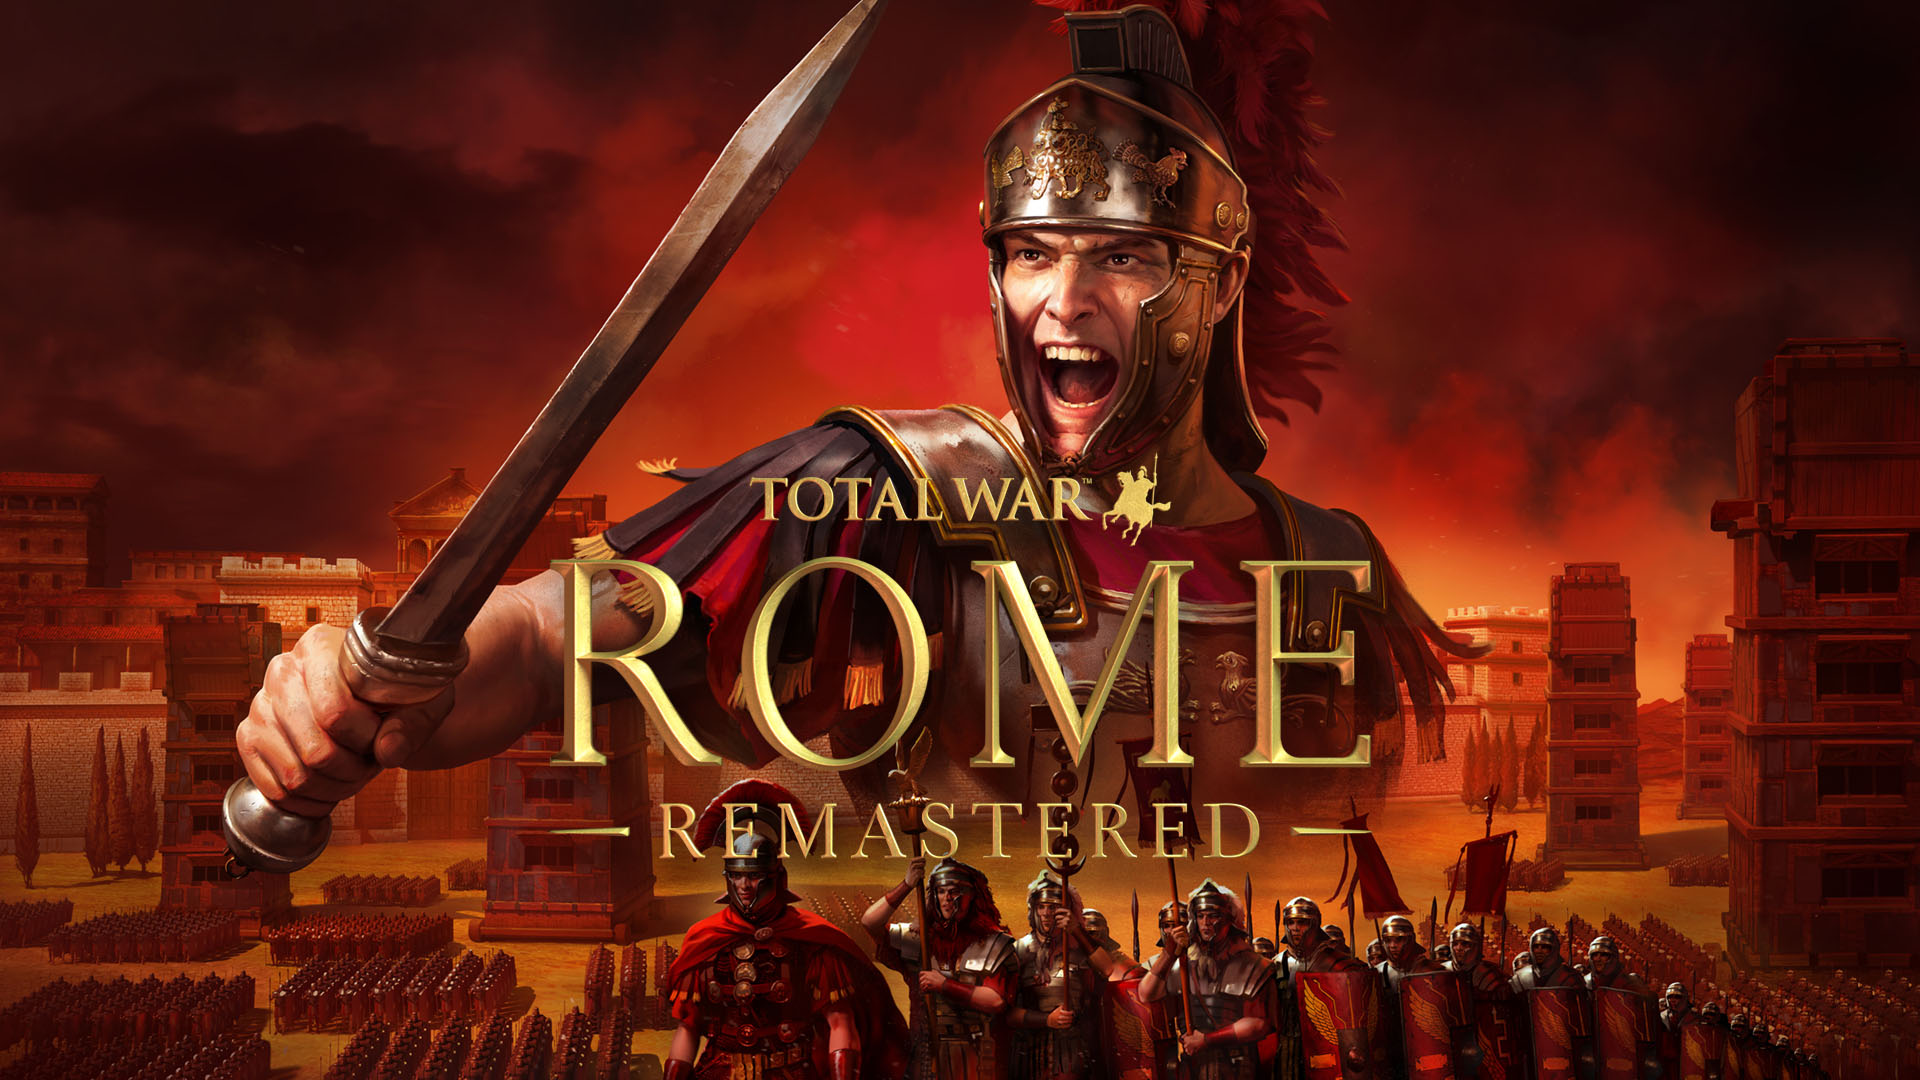 Total War: Rome Remastered Announced